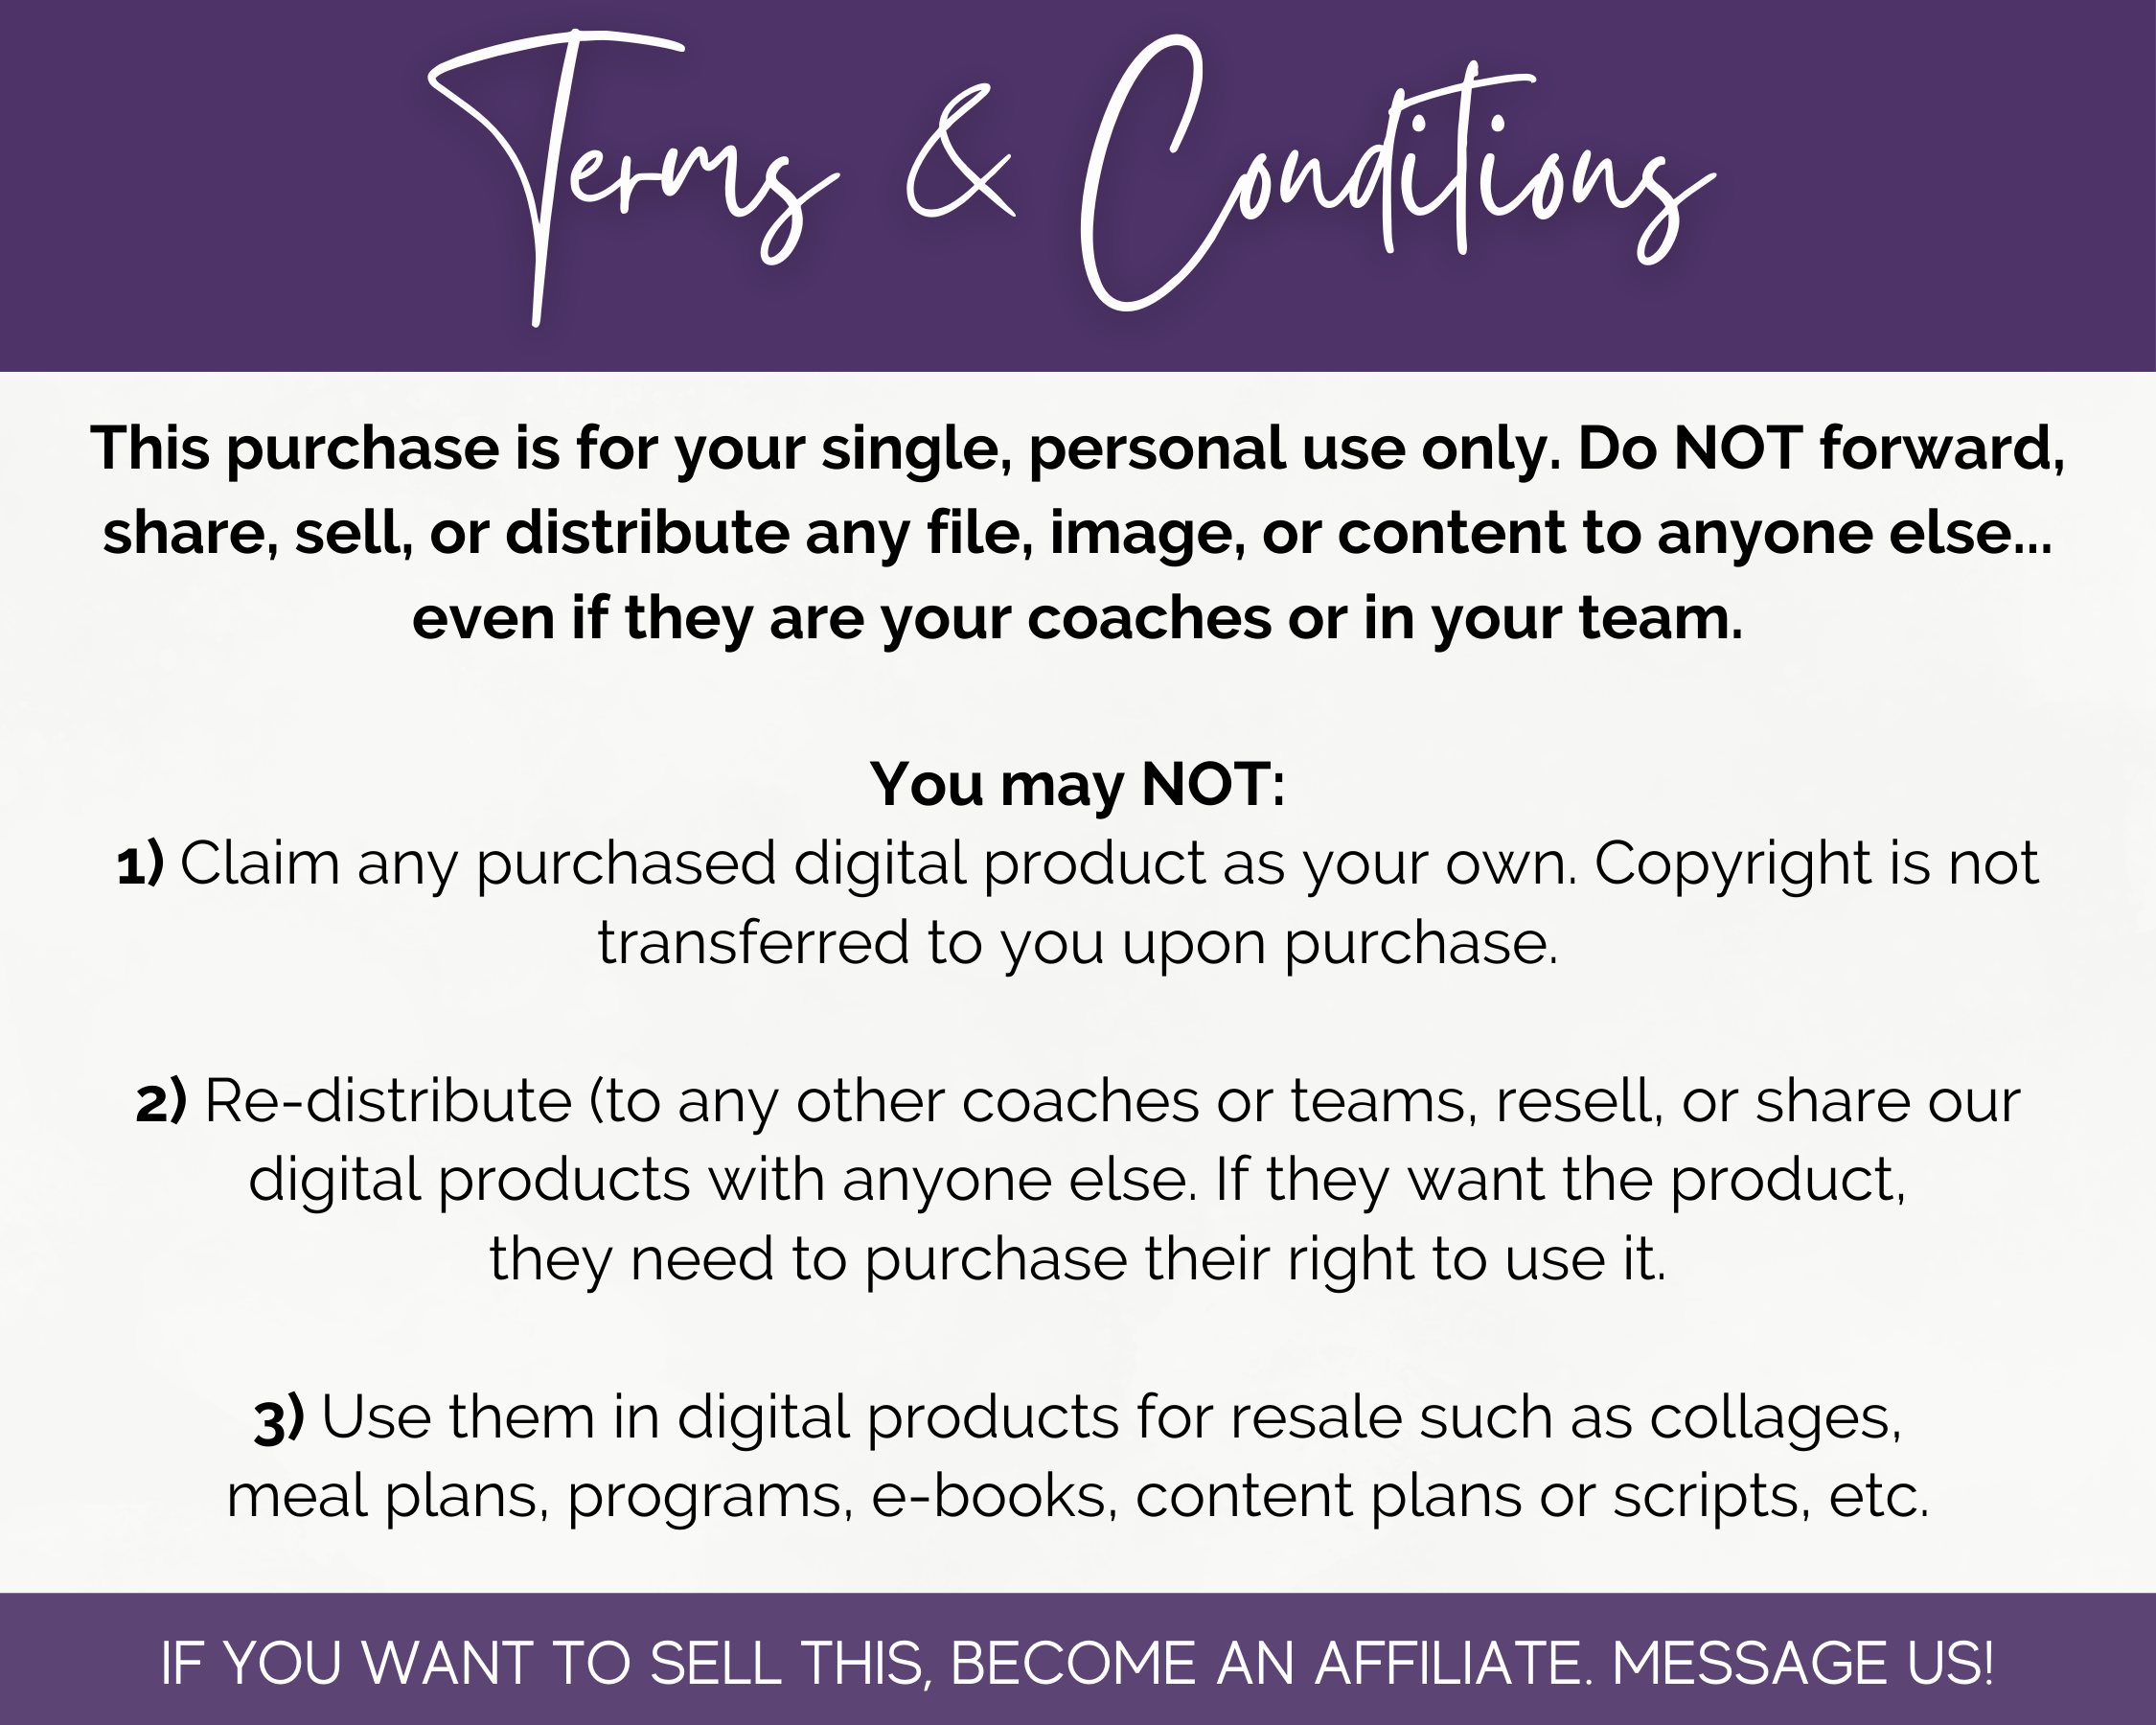 Text outlining terms and conditions of purchase for the May Daily Posting Plan - Your Social Plan by Get Socially Inclined, designed to boost engagement, highlighting restrictions on sharing, redistribution, and usage rights.